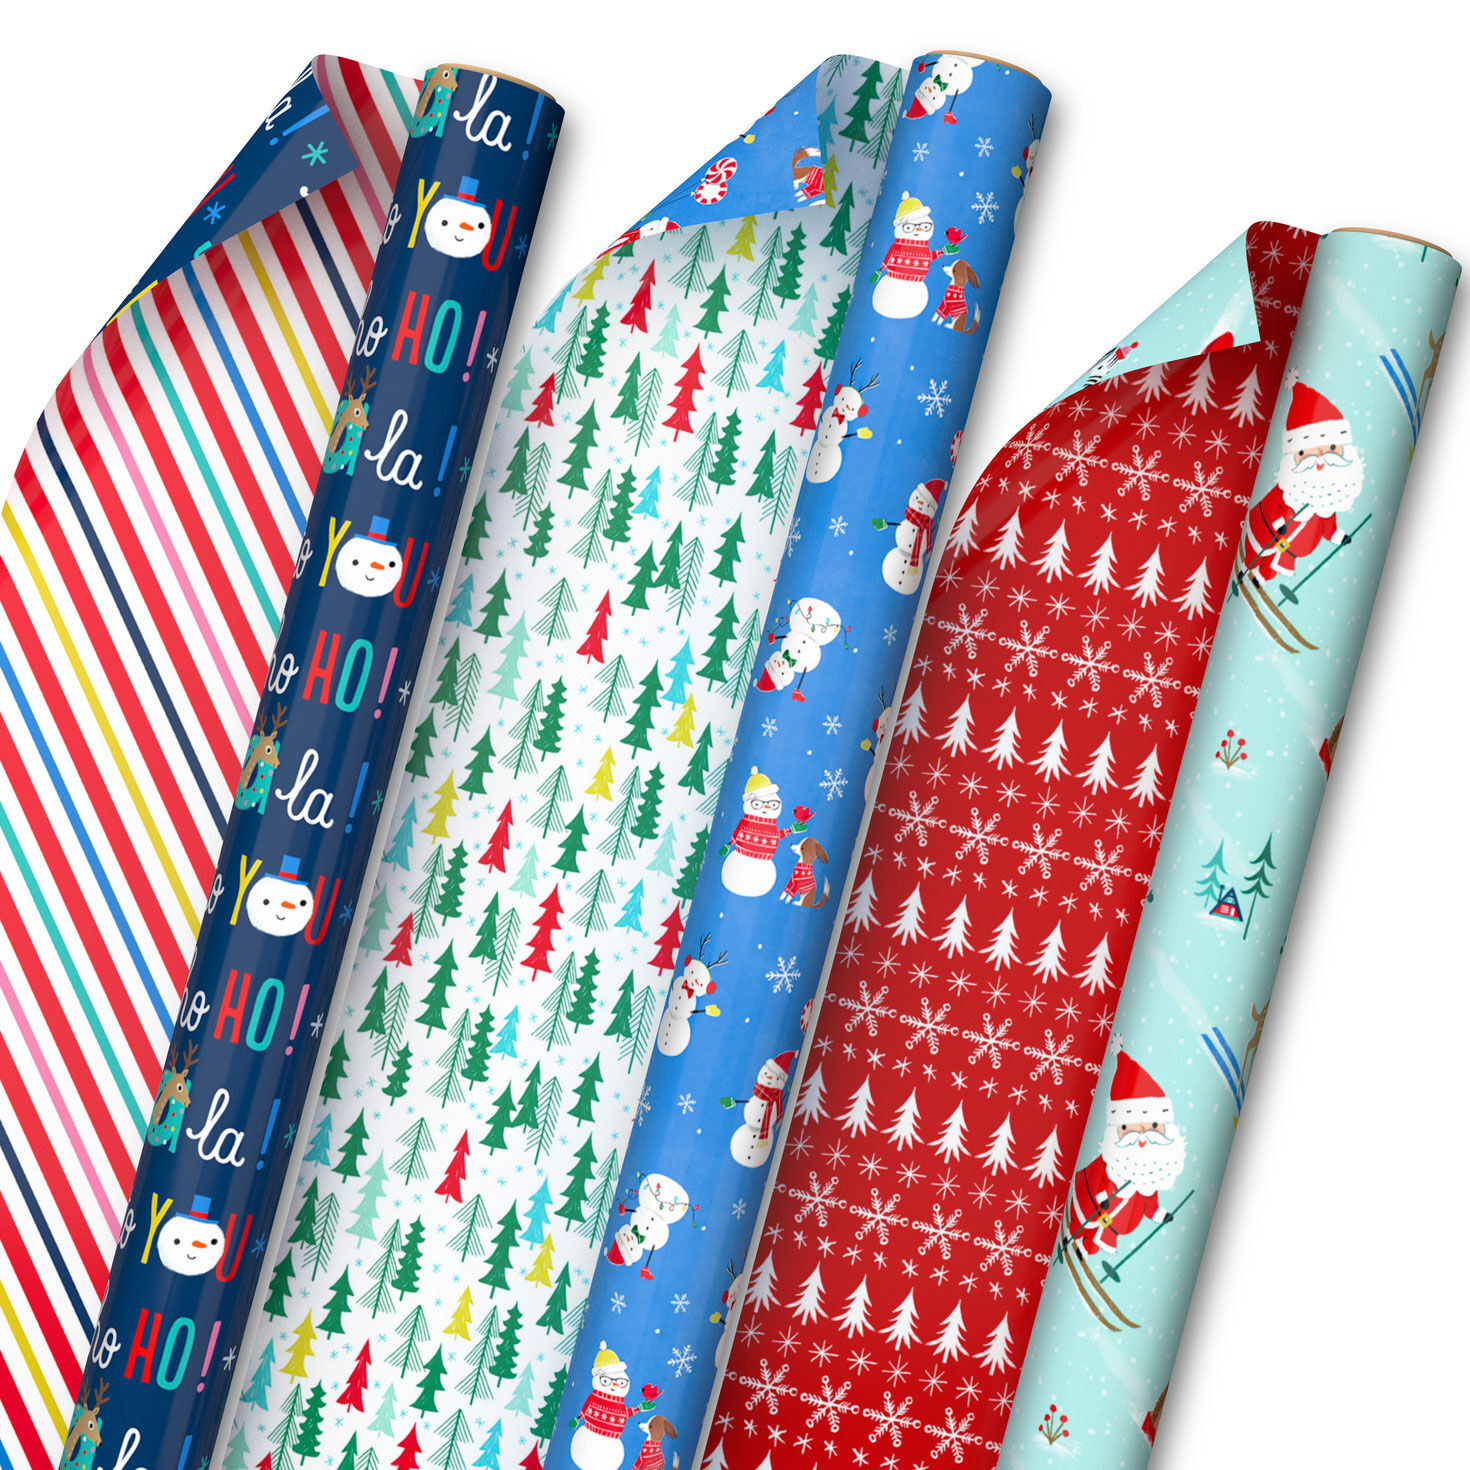 Santa and Friends Christmas Wrapping Paper, 2-Roll Pack, 60 Total Sq. Ft.